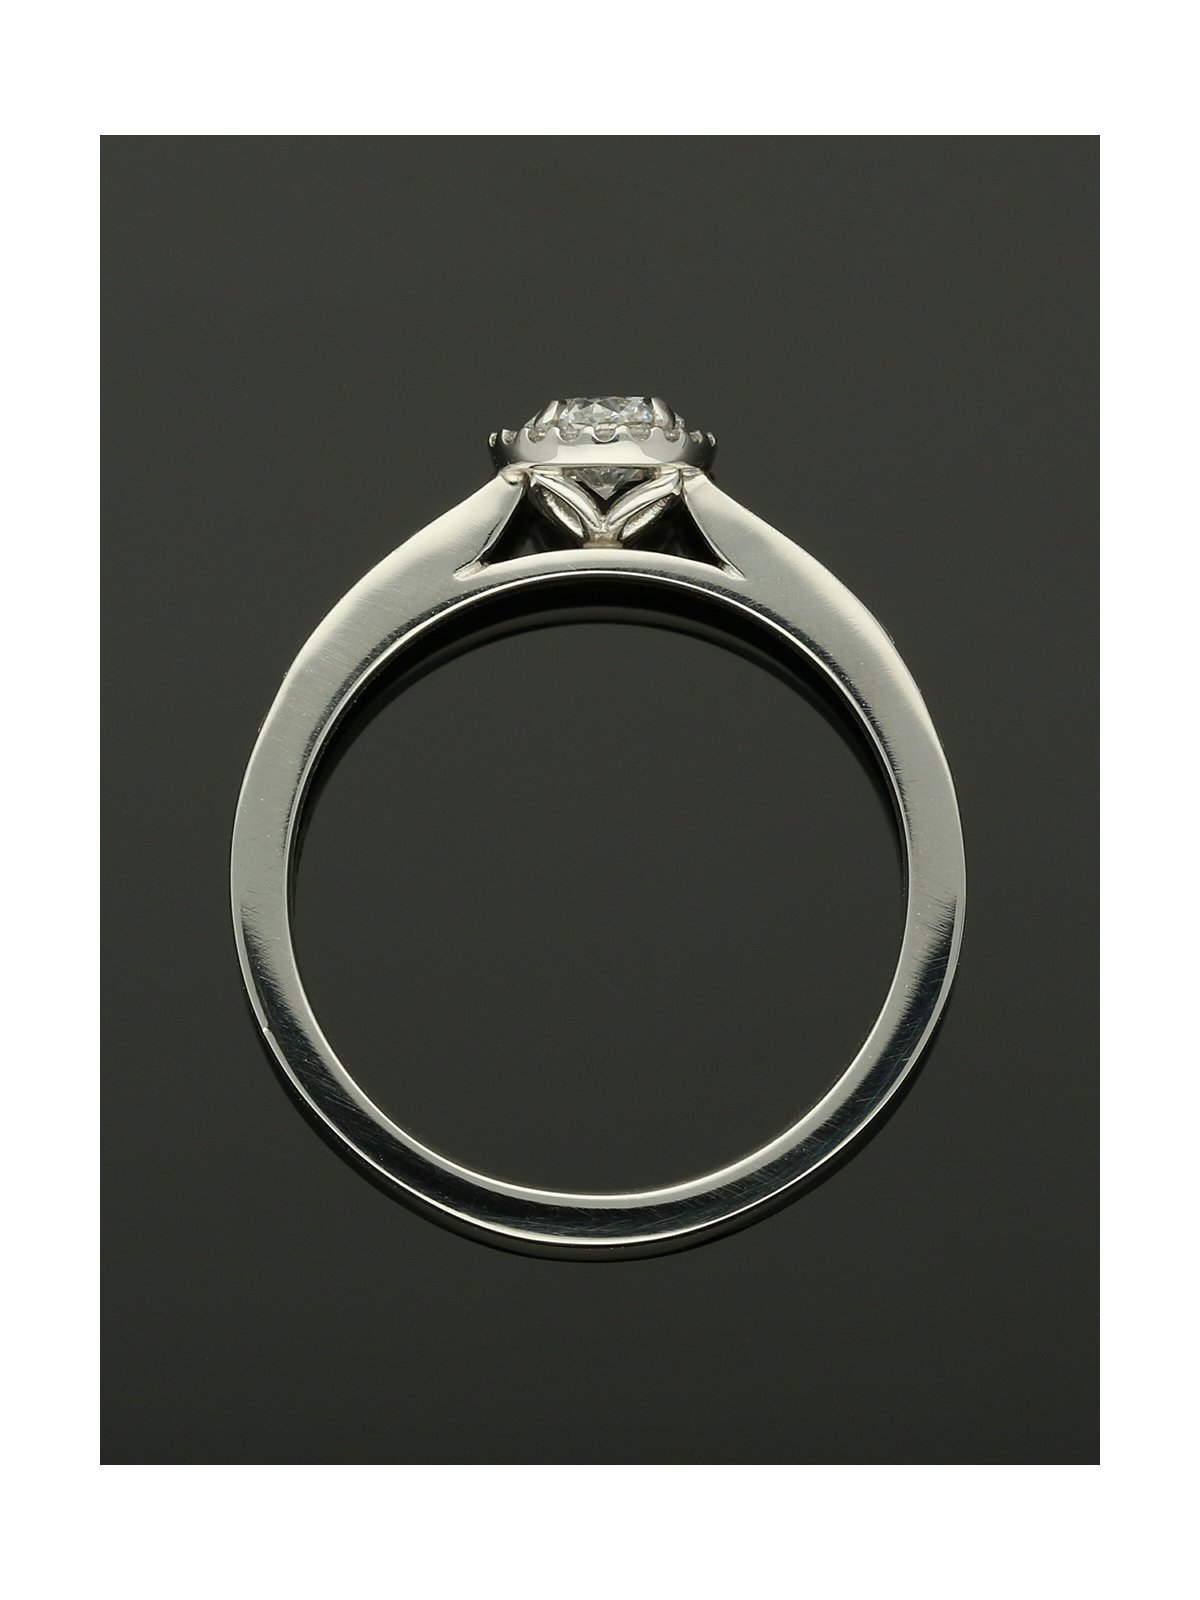 Diamond Halo Engagement Ring 0.33ct Certificated Round Brilliant Cut in Platinum with Diamond Shoulders